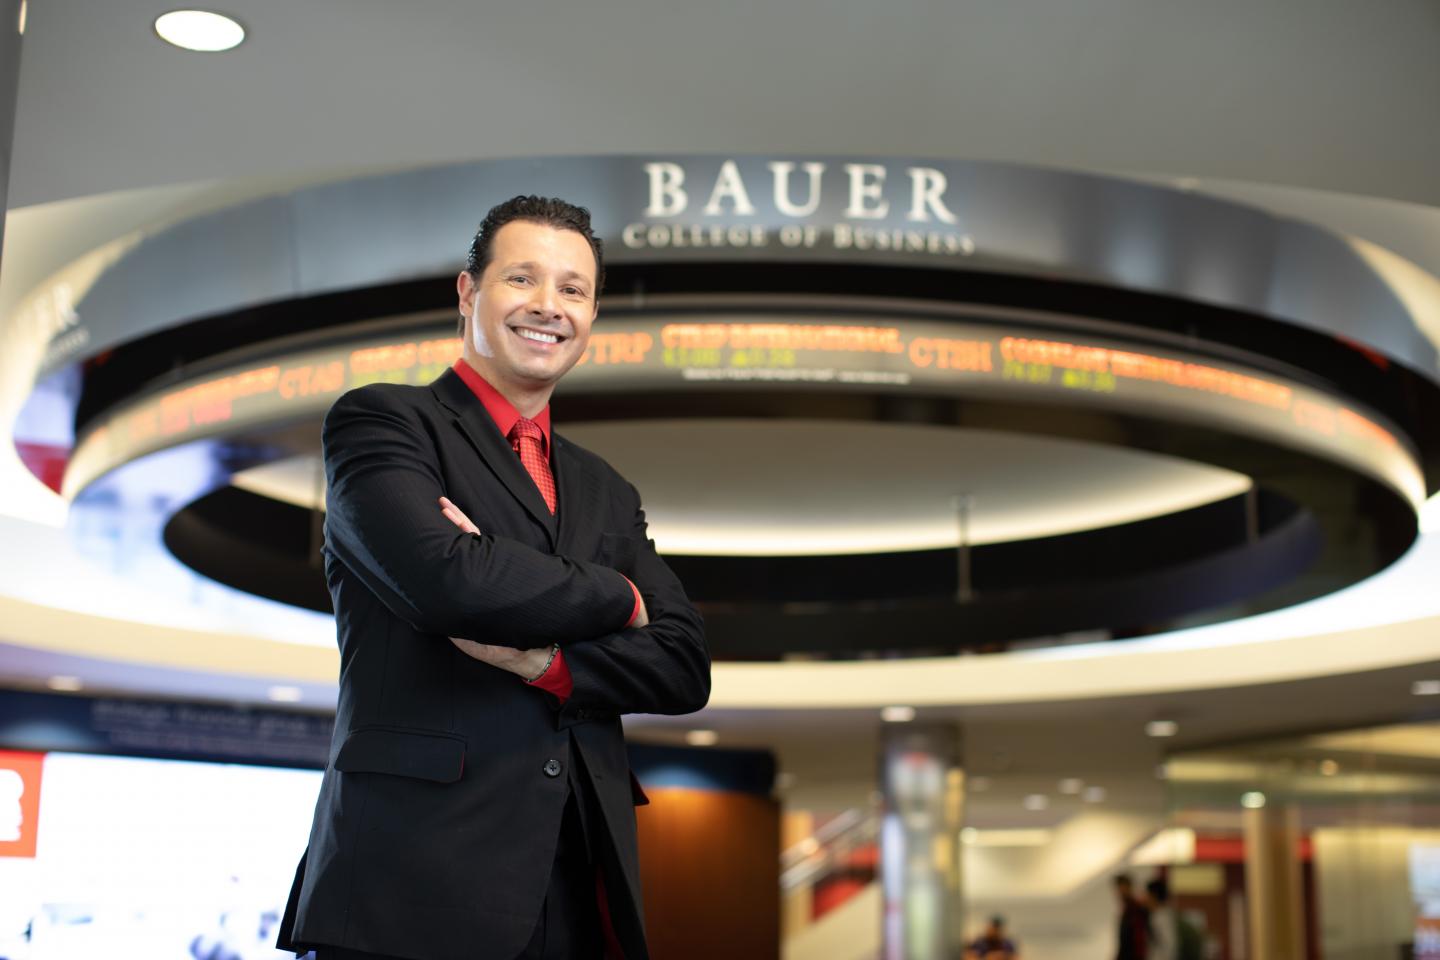 Paul Pavlou, Dean of the University of Houston Bauer College of Business